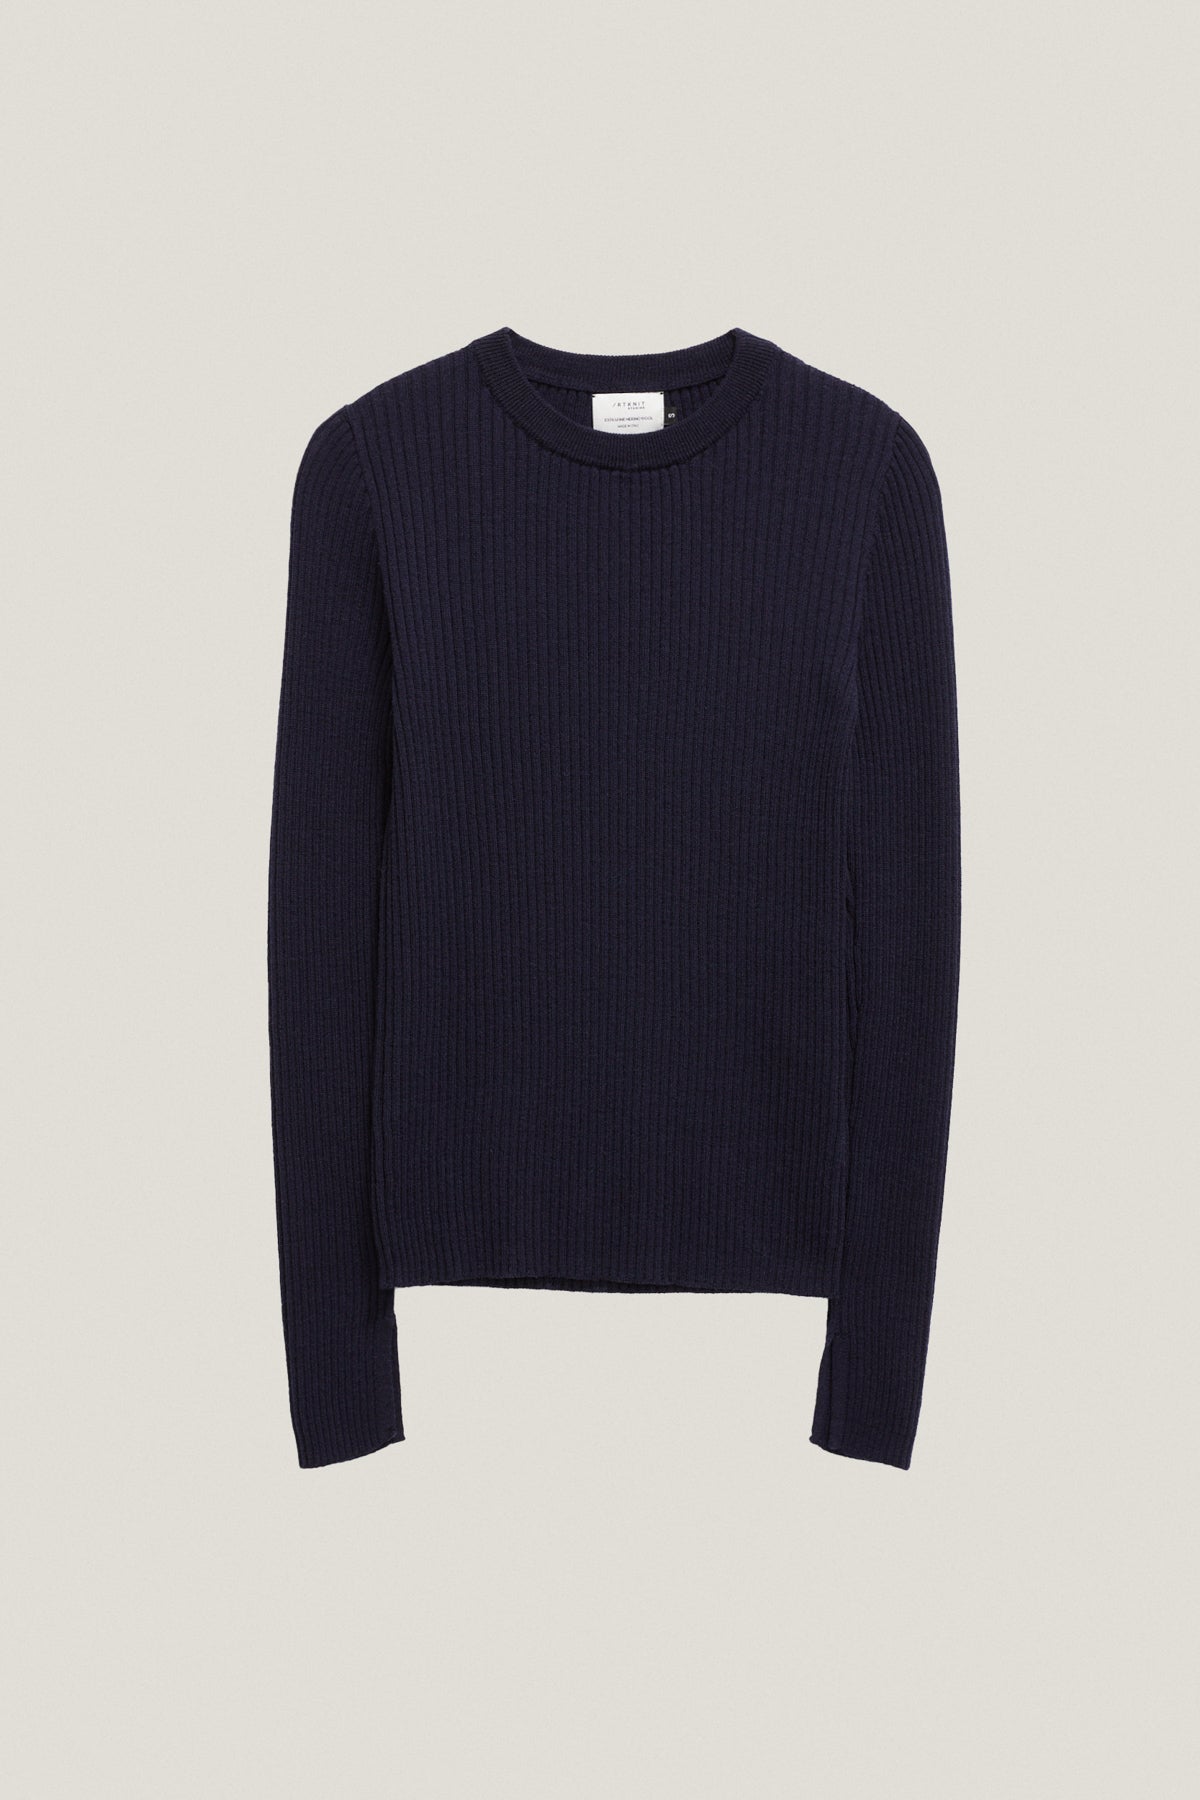 the merino wool ribbed sweater 2 oxford blue